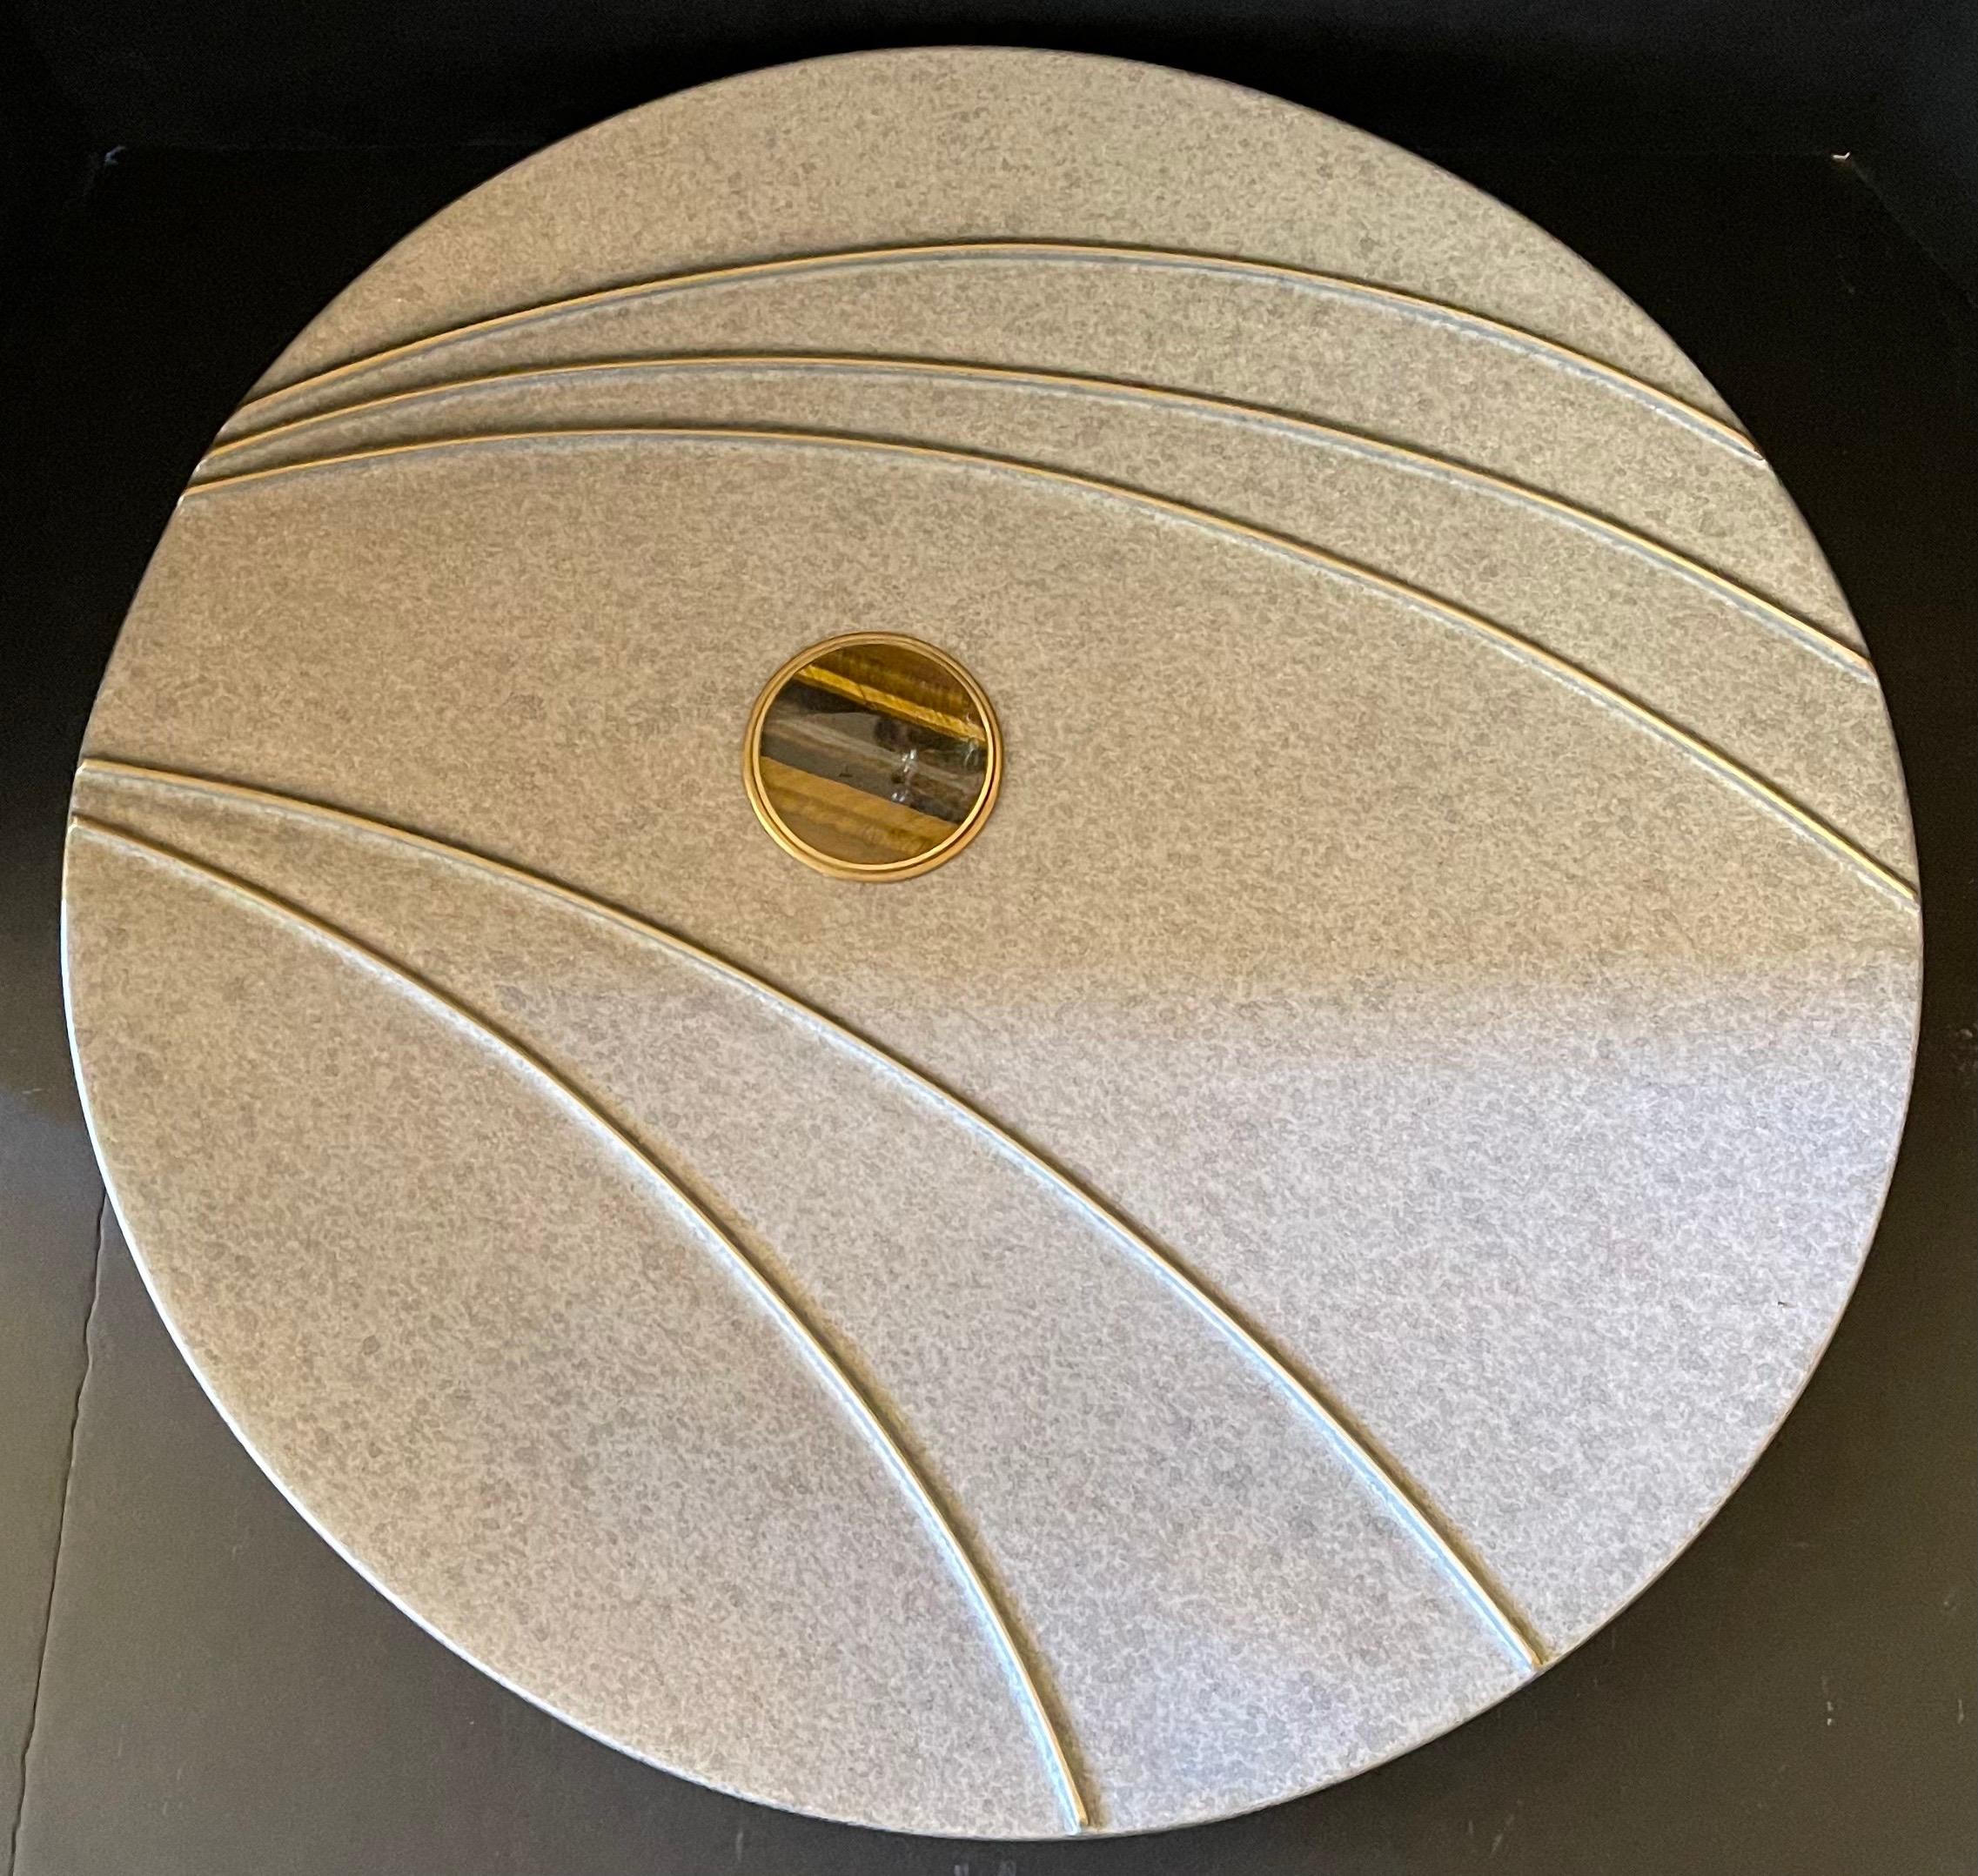 A wonderful Mid-Century Modern Lorin Marsh large round centerpiece inset with a precious tiger eye stone and a brass band in a metal silver flake finish

Measures: 21